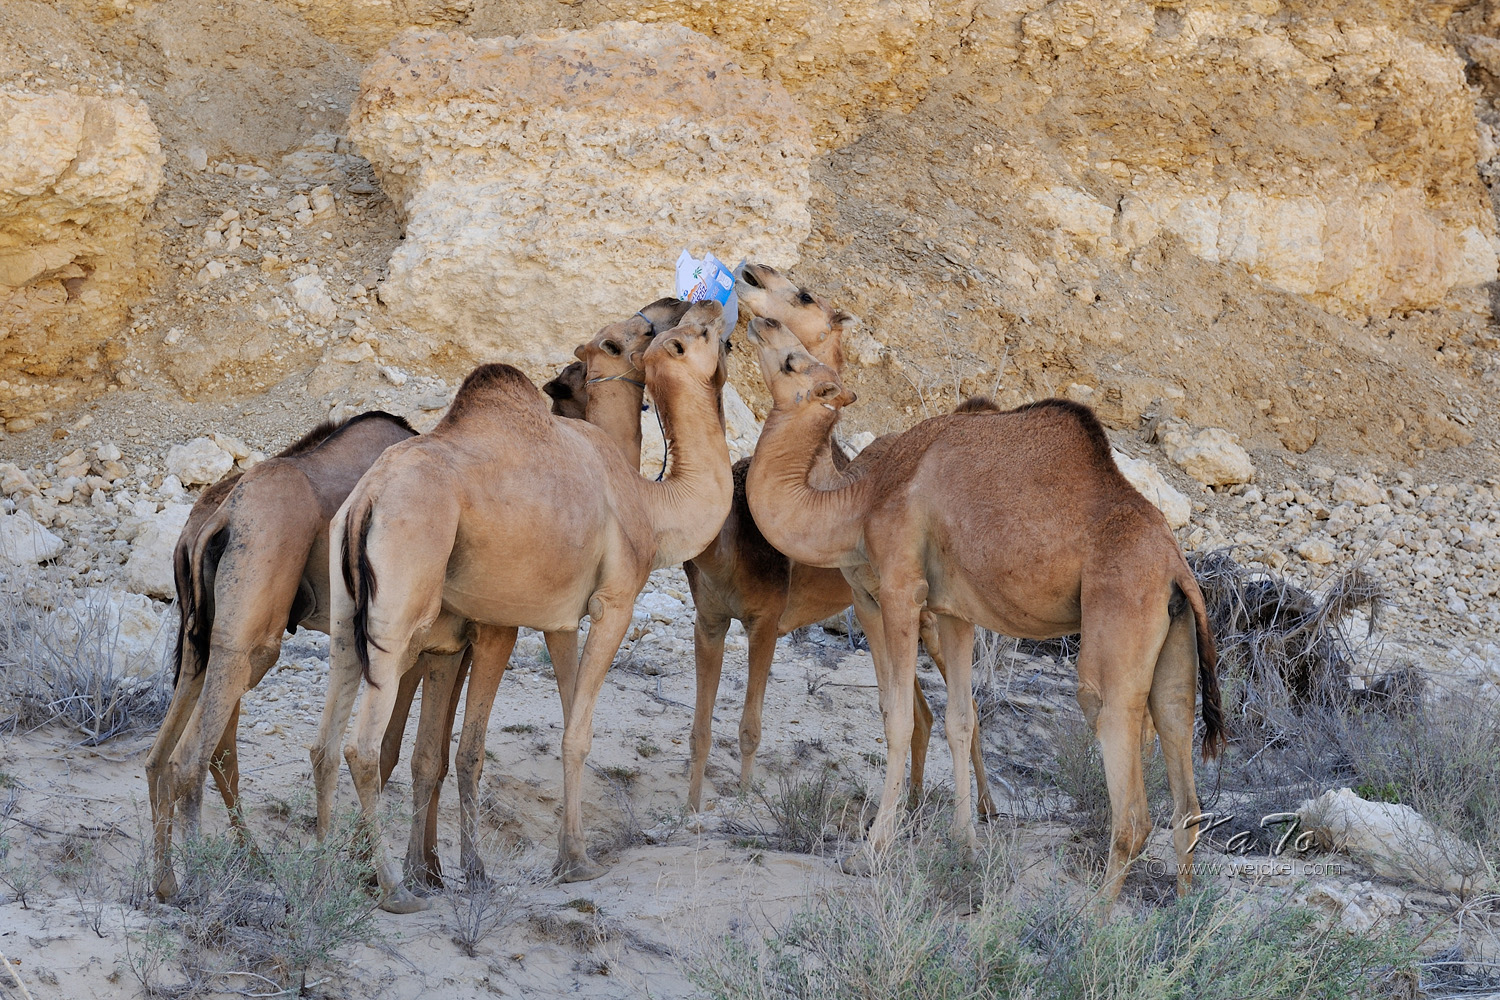 Camels playing with a carton-box